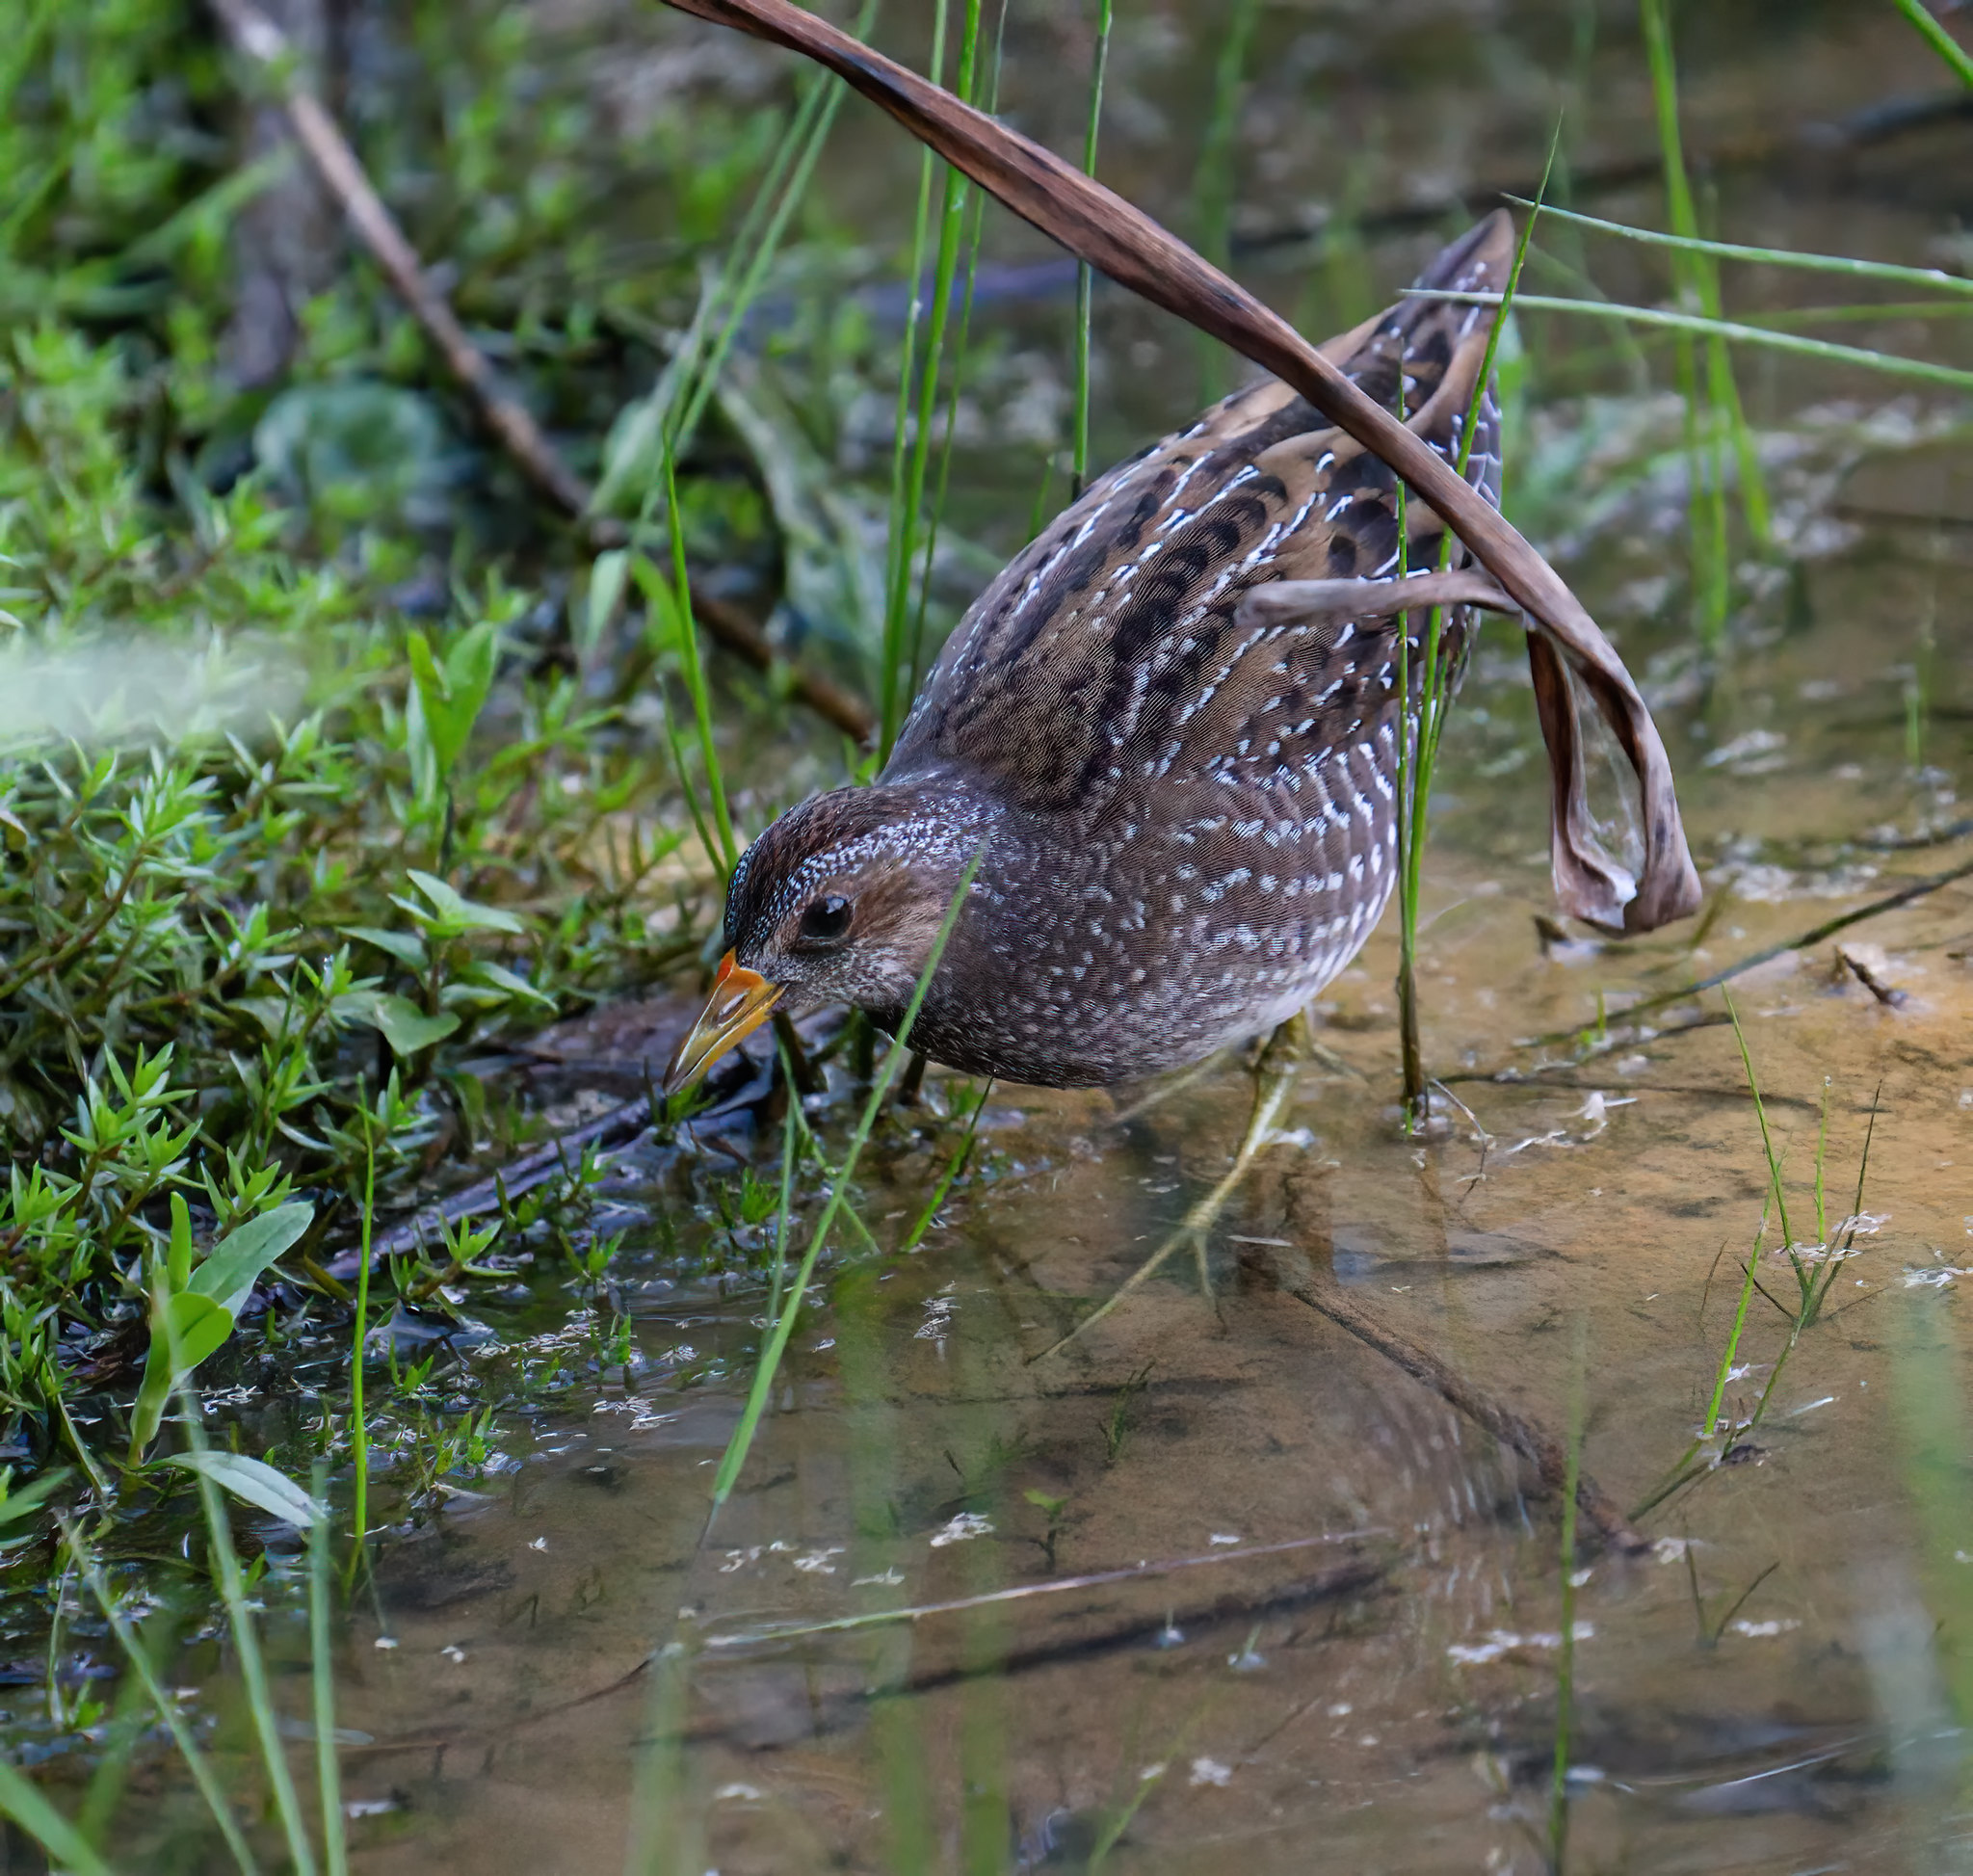 Spotted Crake - almost dark but surprisingly not too bad outcomes